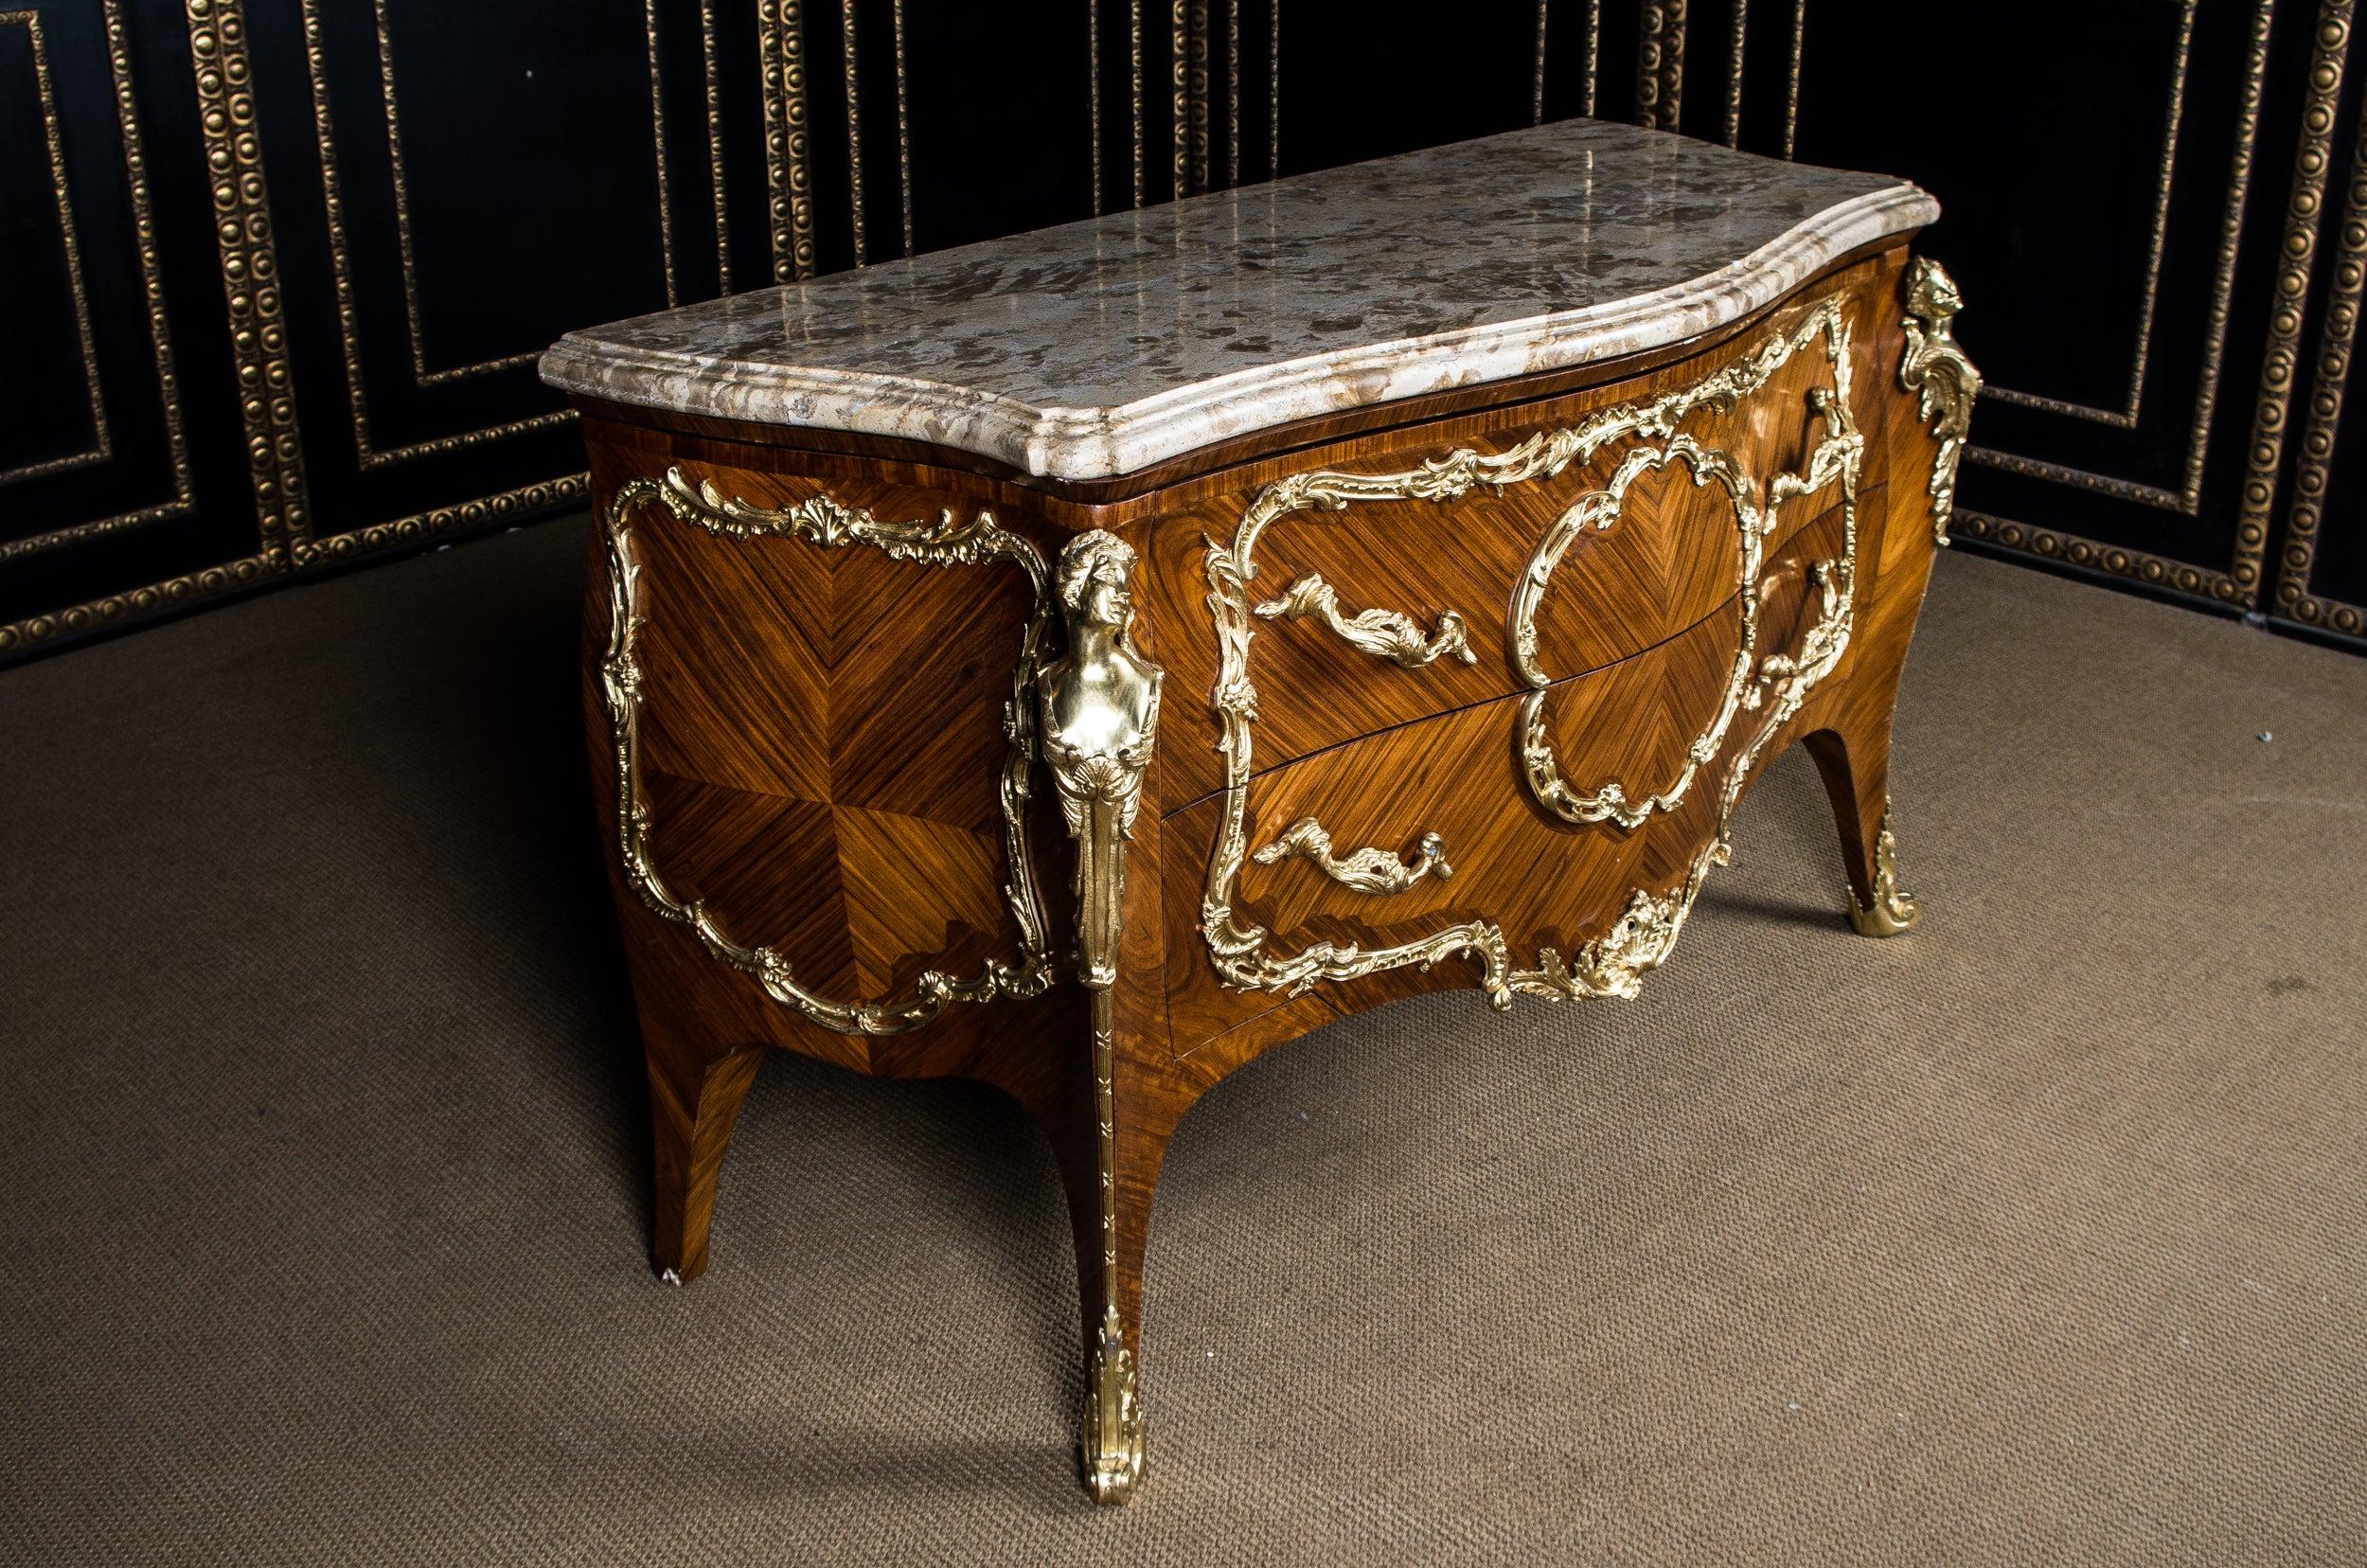 High Quality French Chest of Drawers in the Louis Quinze Style Marble Top 13